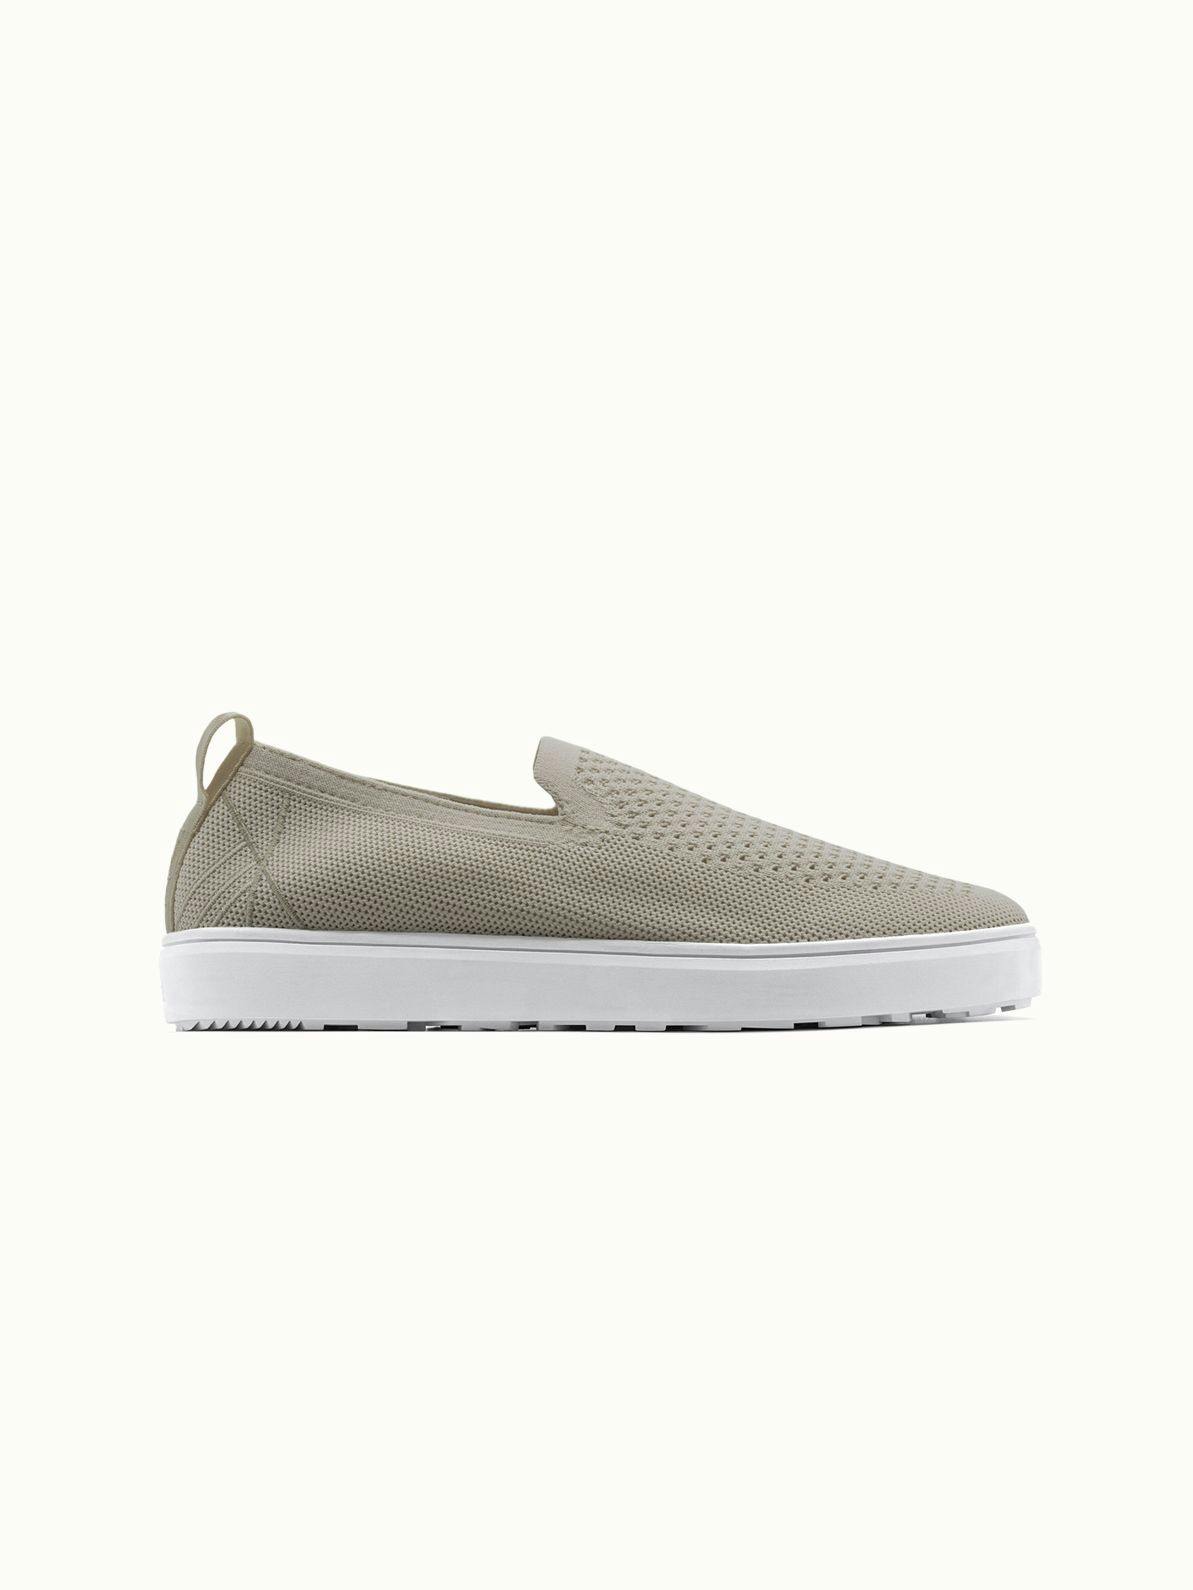 Dive into summer with Stavern breathable slip-on sneakers, crafted for cool comfort and effortless maintenance with their machine-washable design.